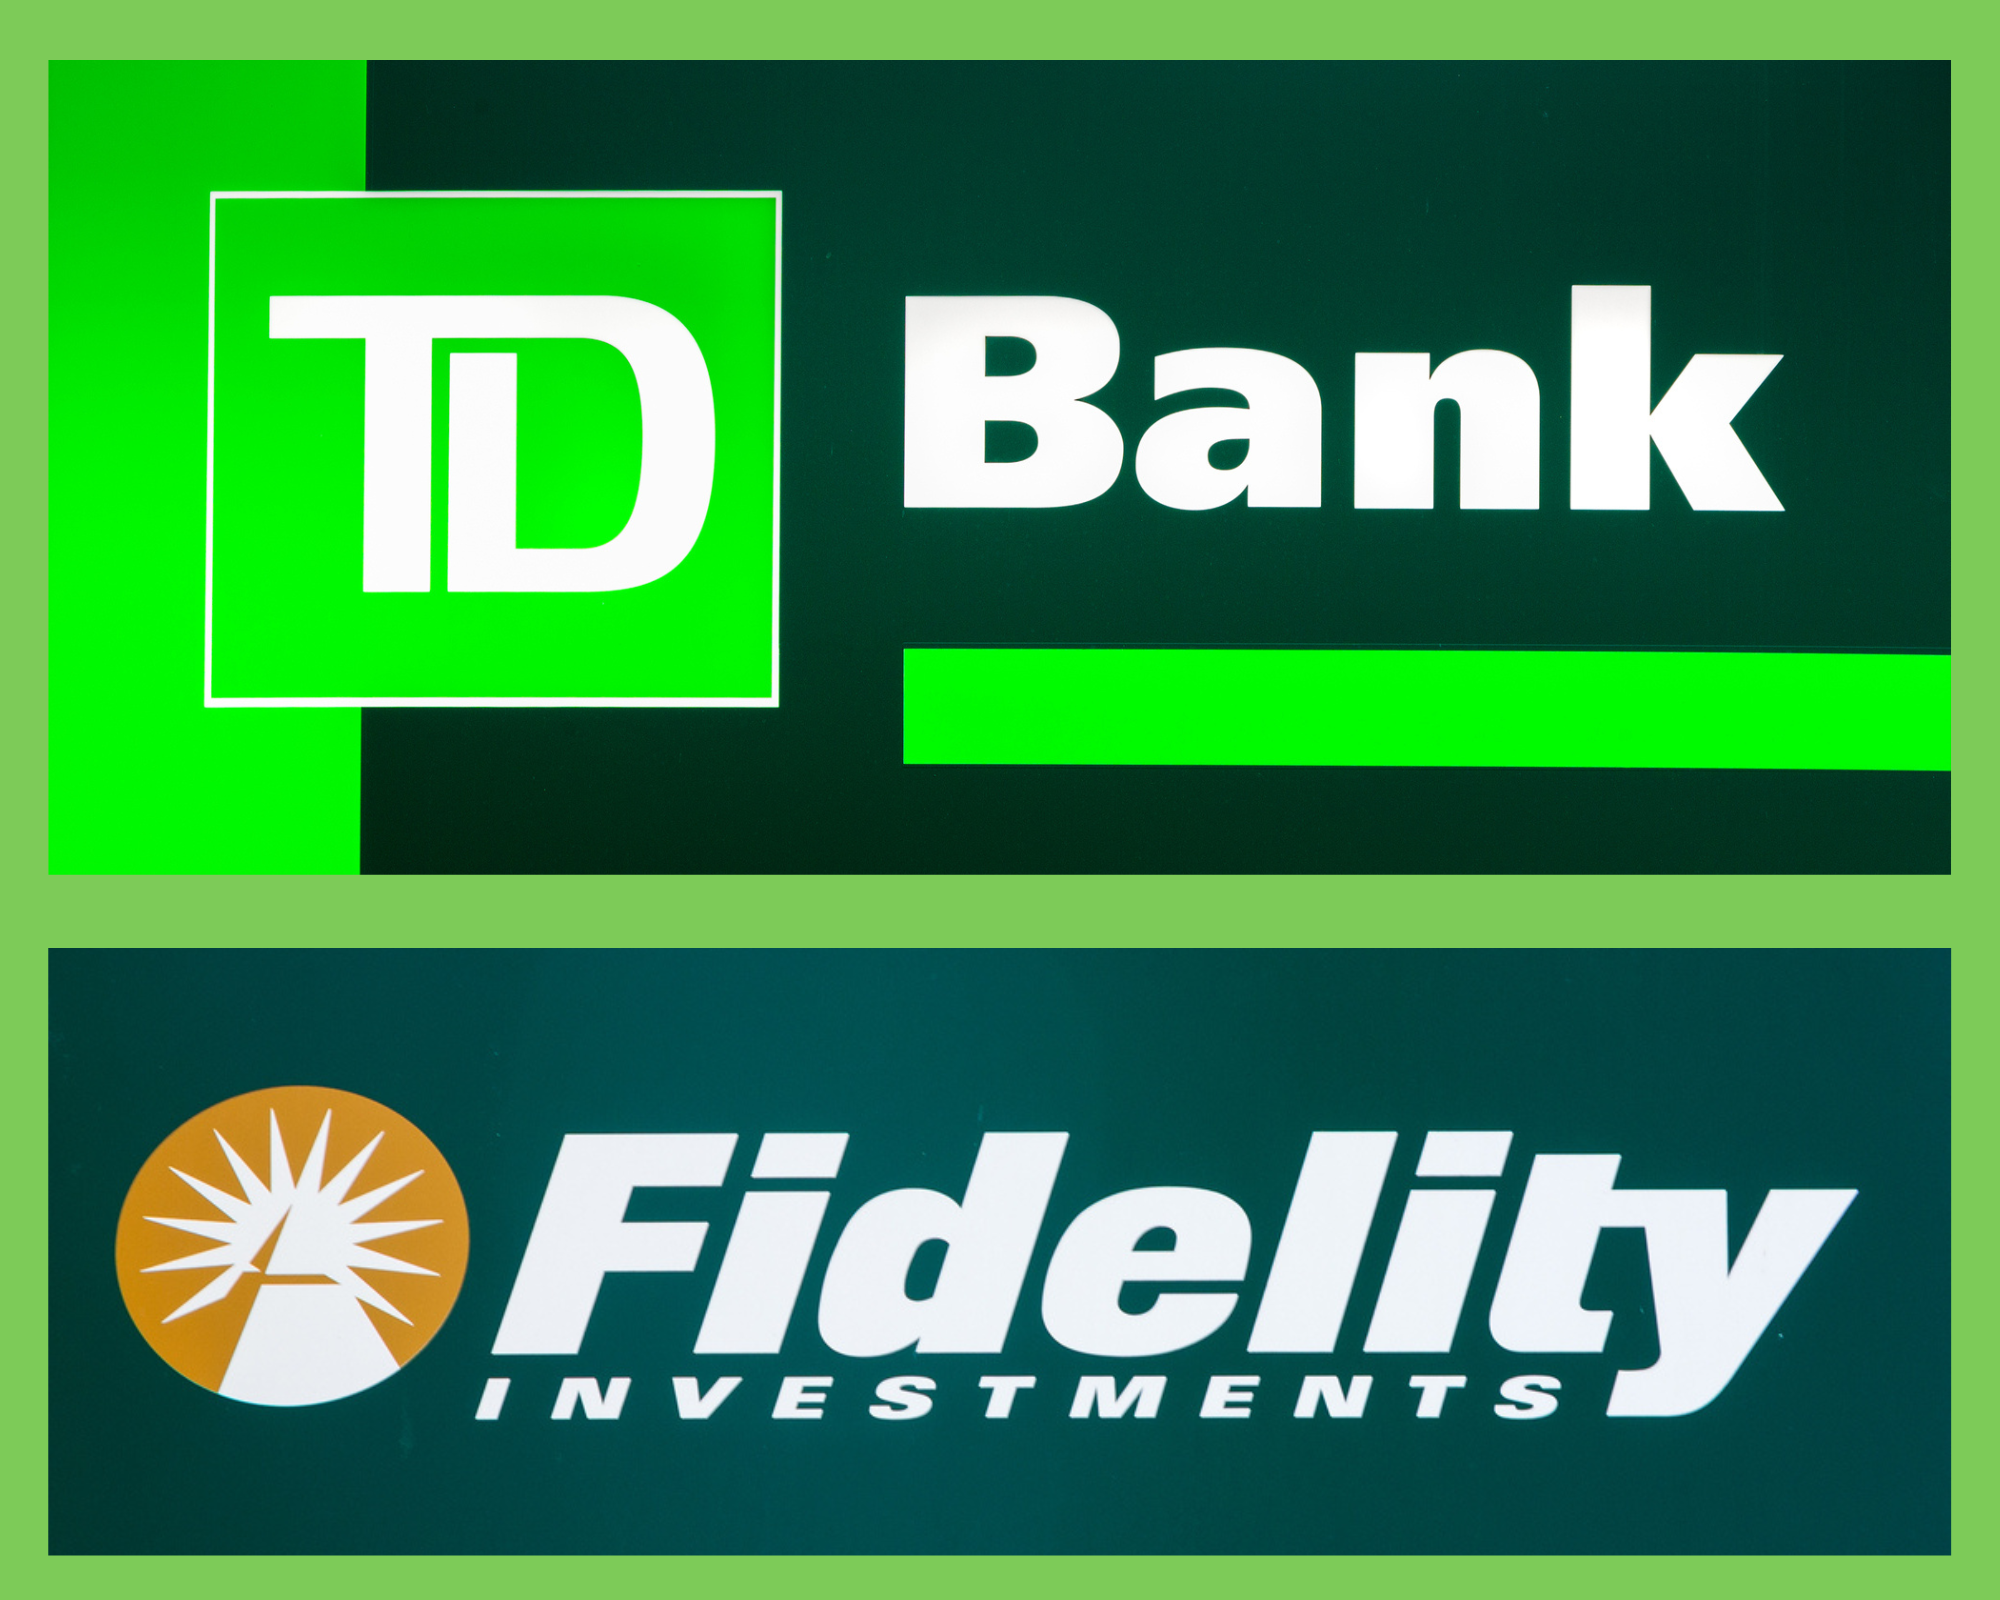 green logos of TD Bank and Fidelity